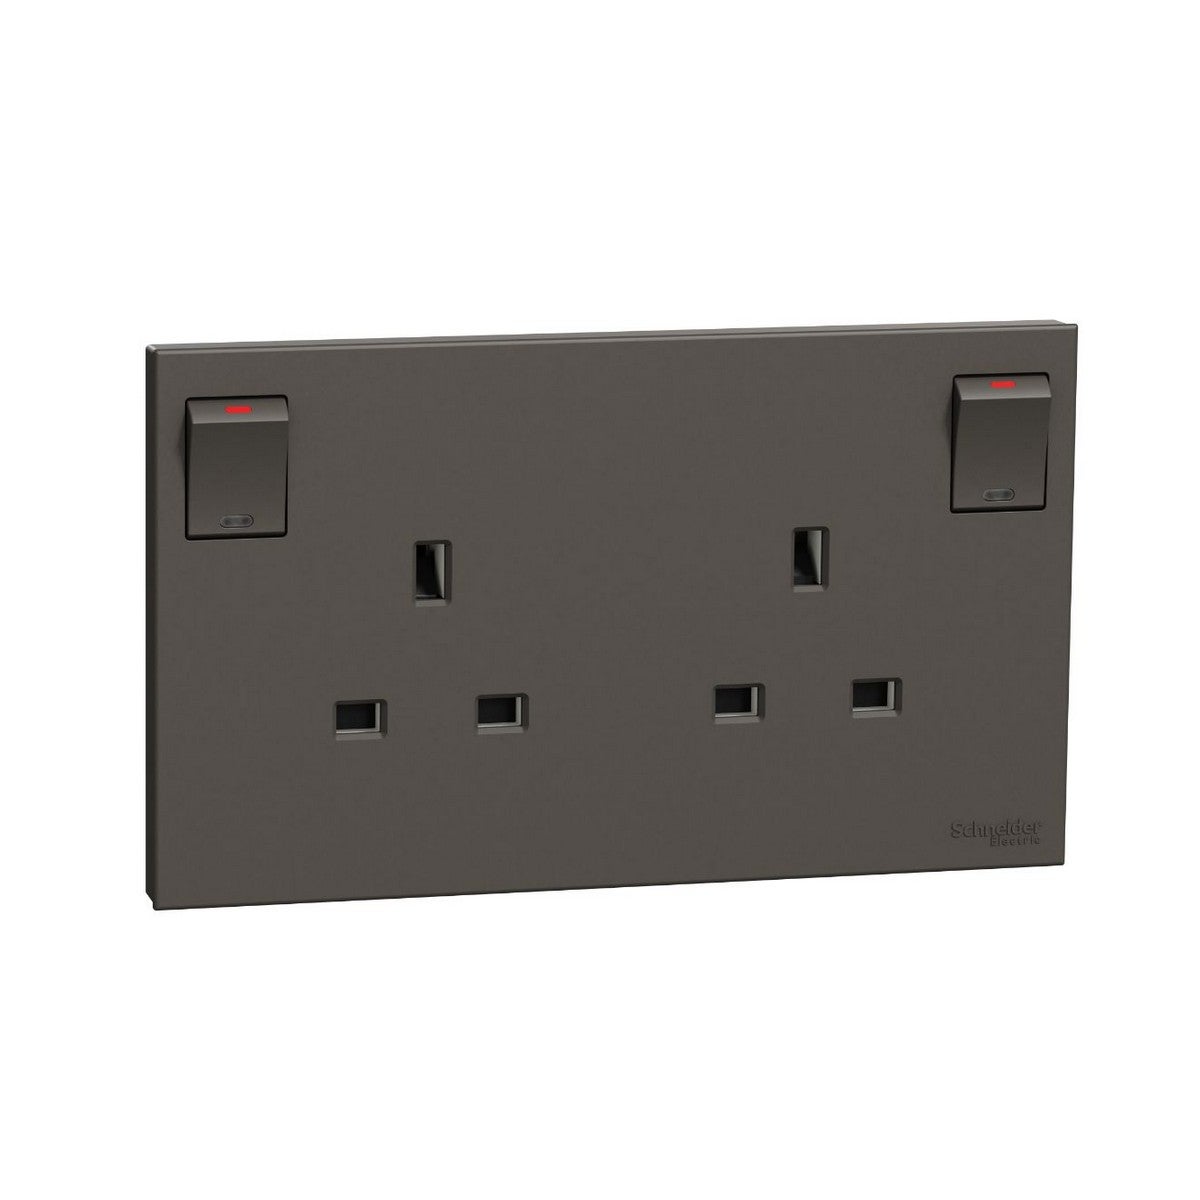 AvatarOn C, Switched Socket, 13A 250V, 2 Gang, with LED, Dark Grey